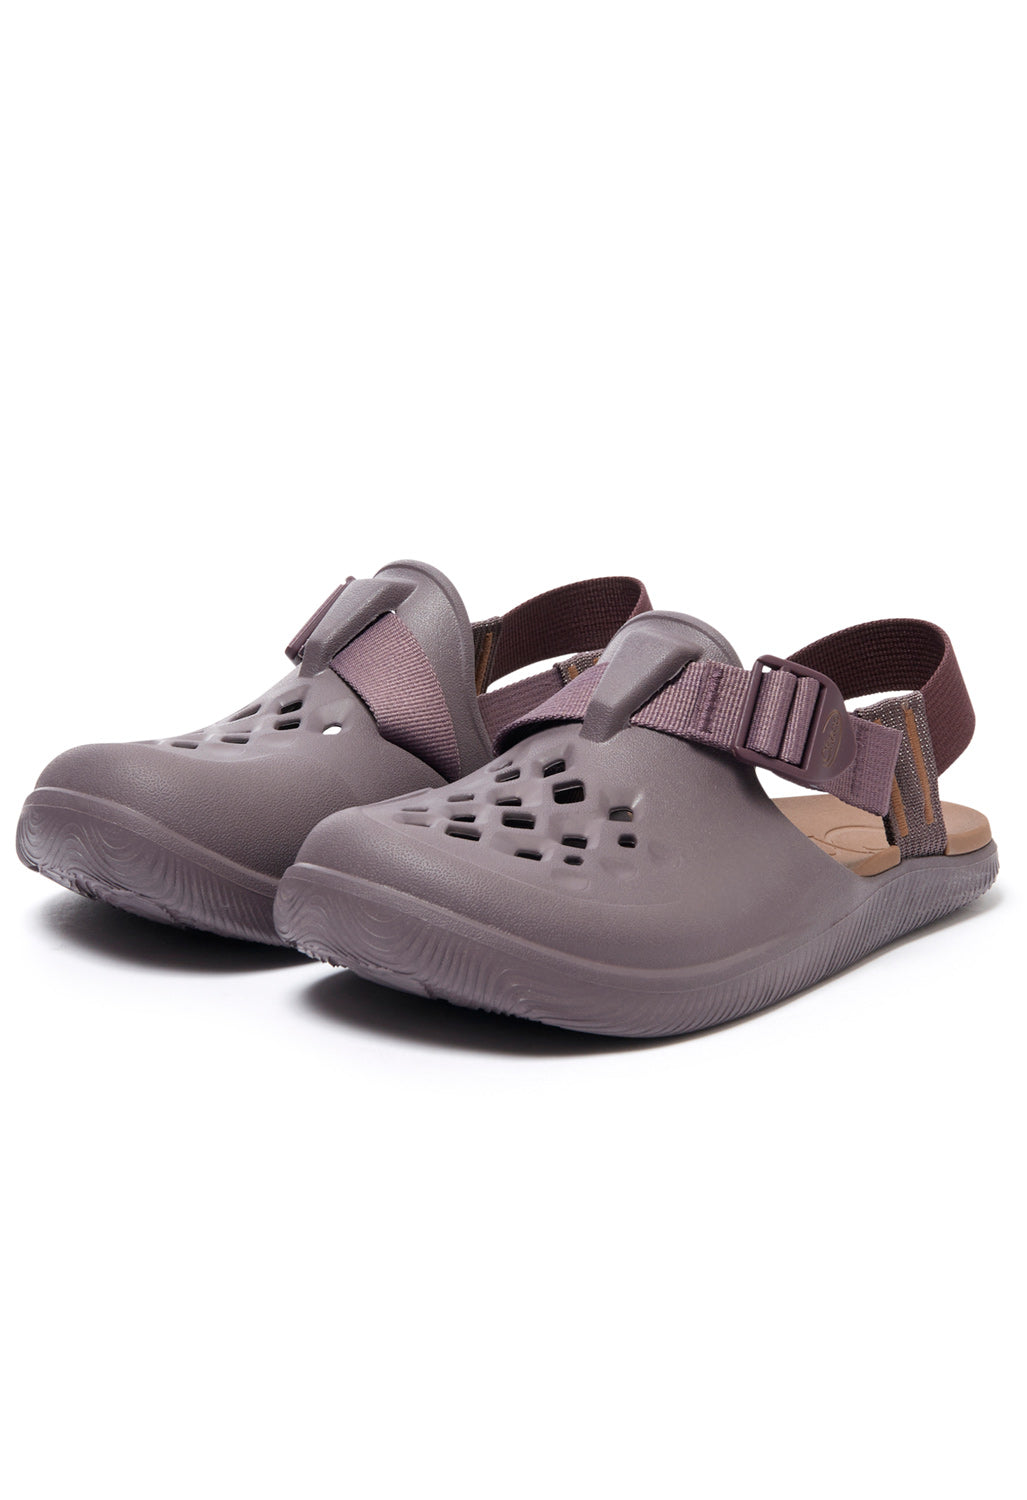 Chaco Women's Chillos Clogs - Sparrow